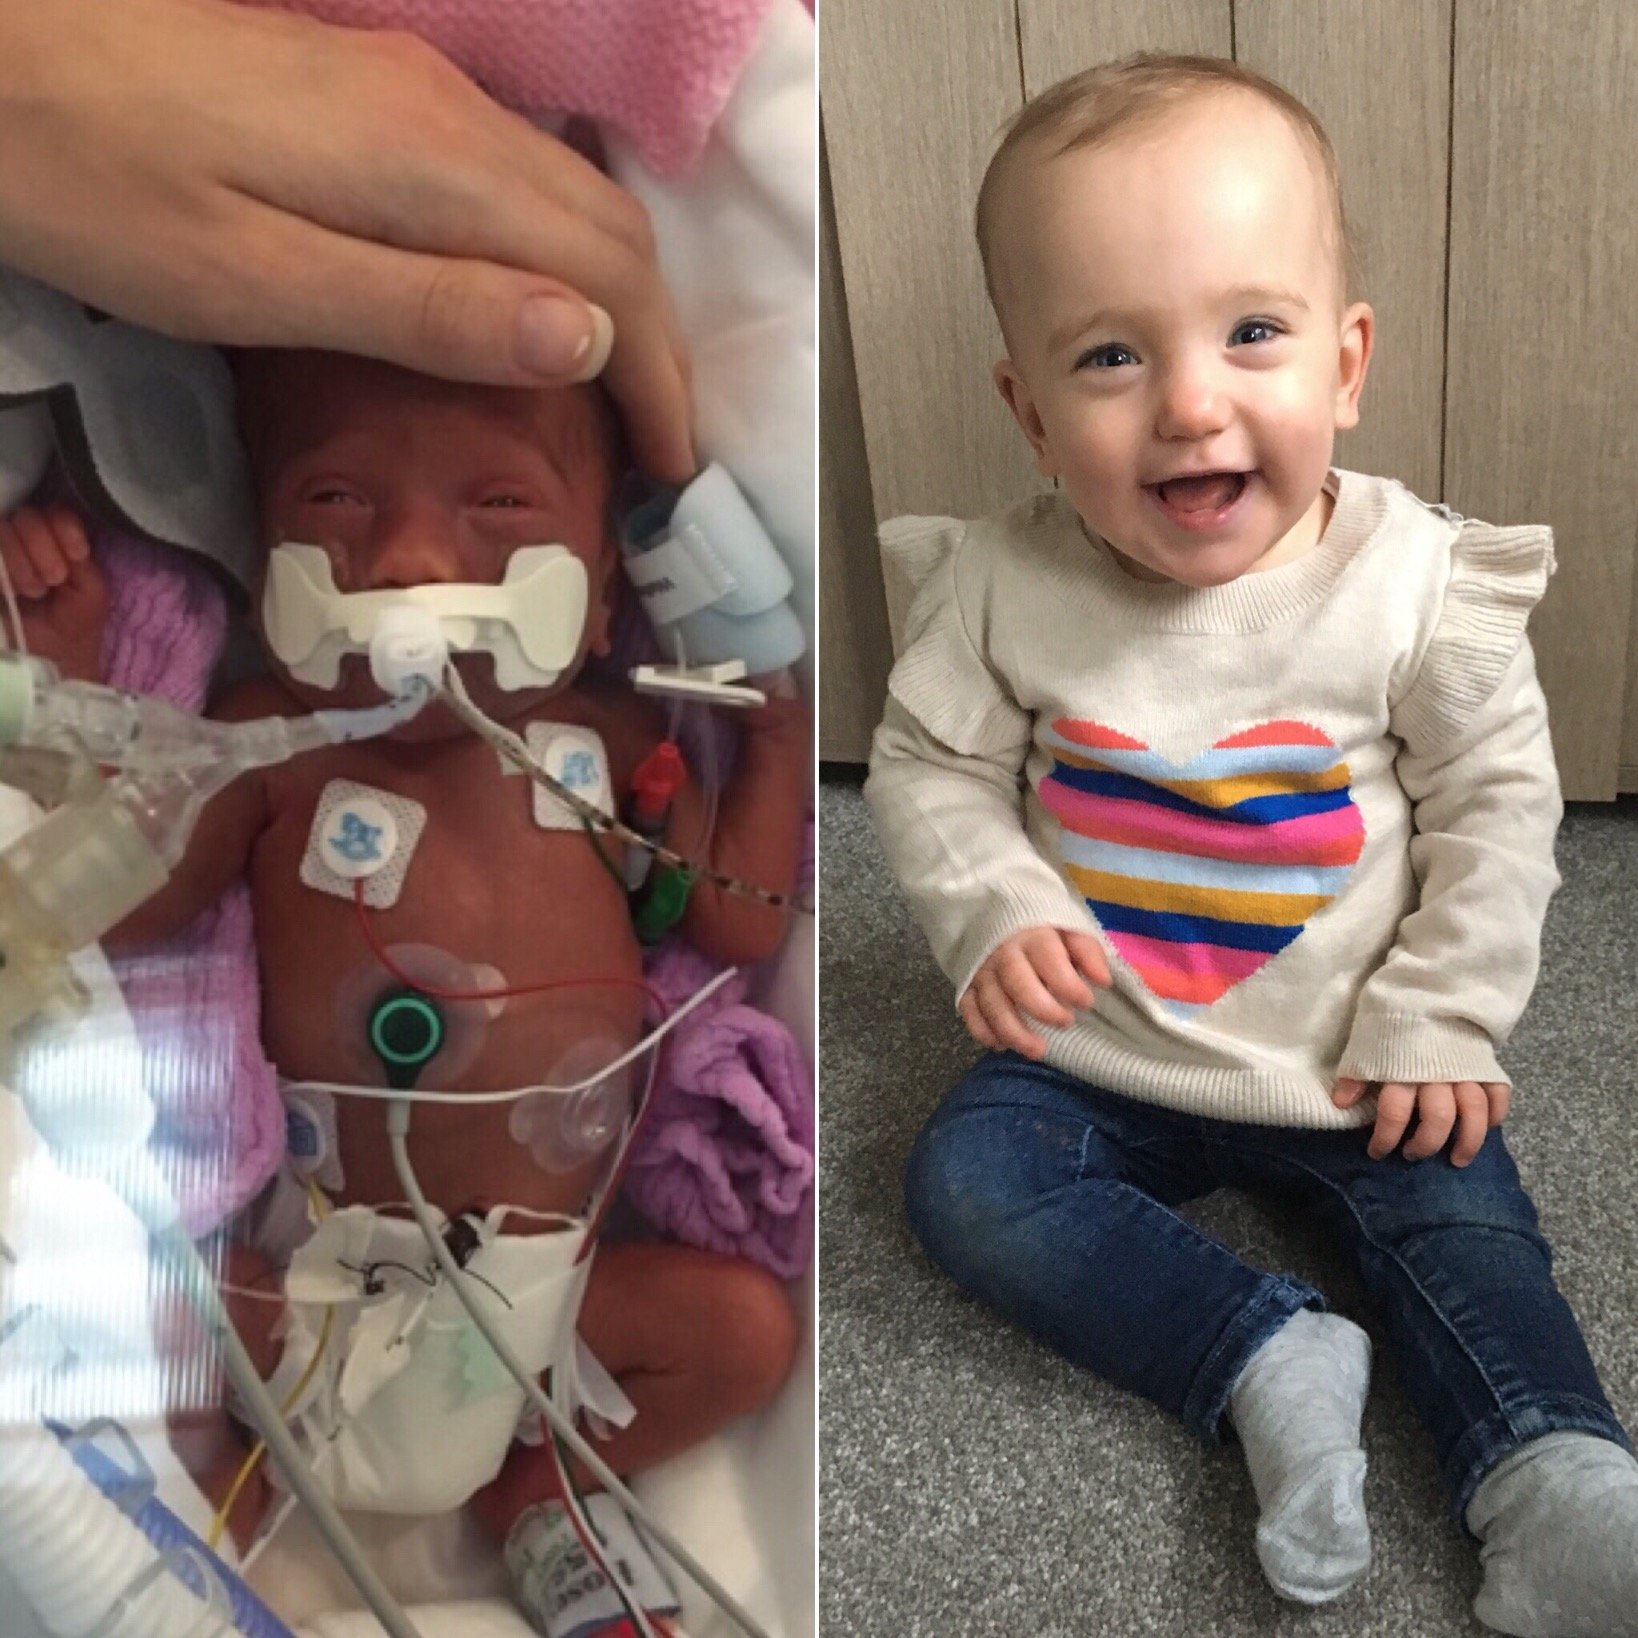 Running and cycling the 116 mile journey my daughter took to receive life saving treatment after being born prematurely at 27 weeks https://t.co/CUcQAtPfO4